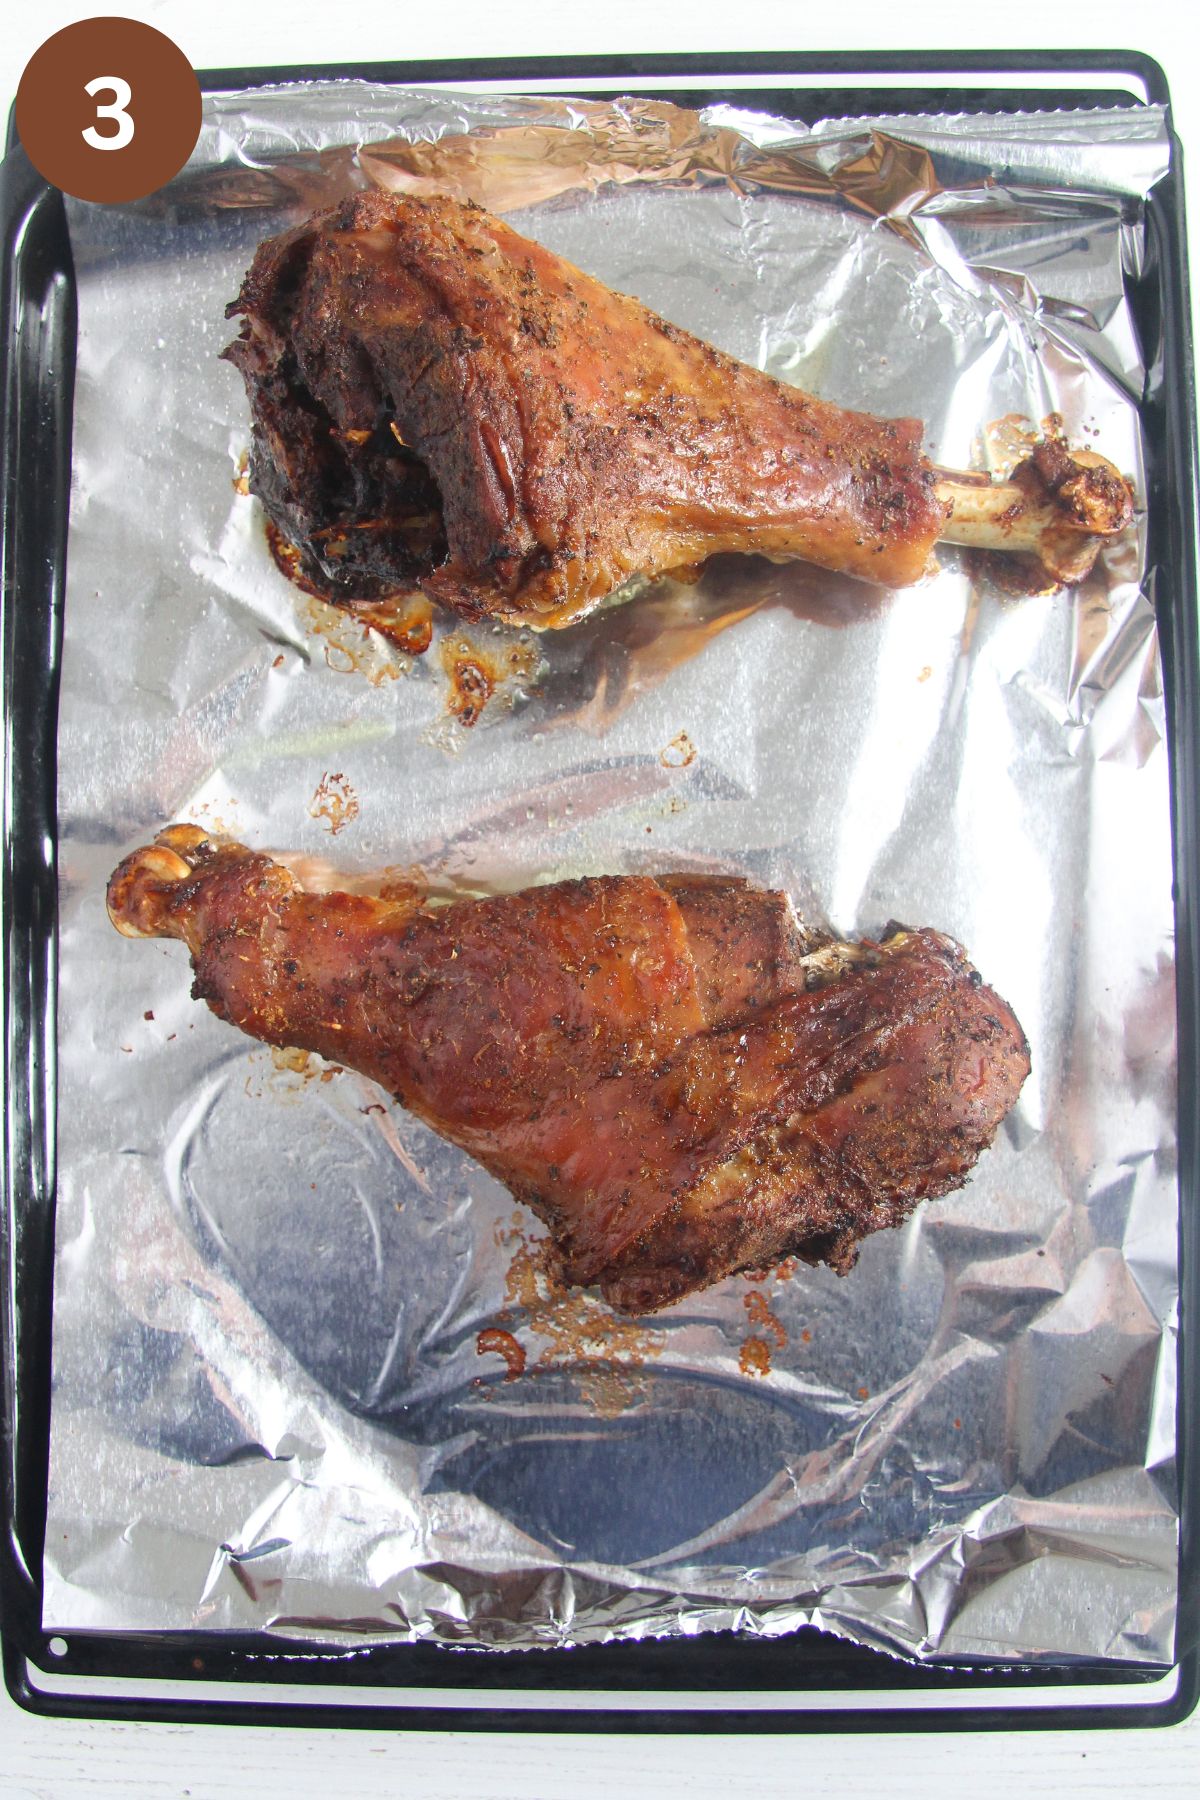 two turkey legs on a baking sheet lined with foil.